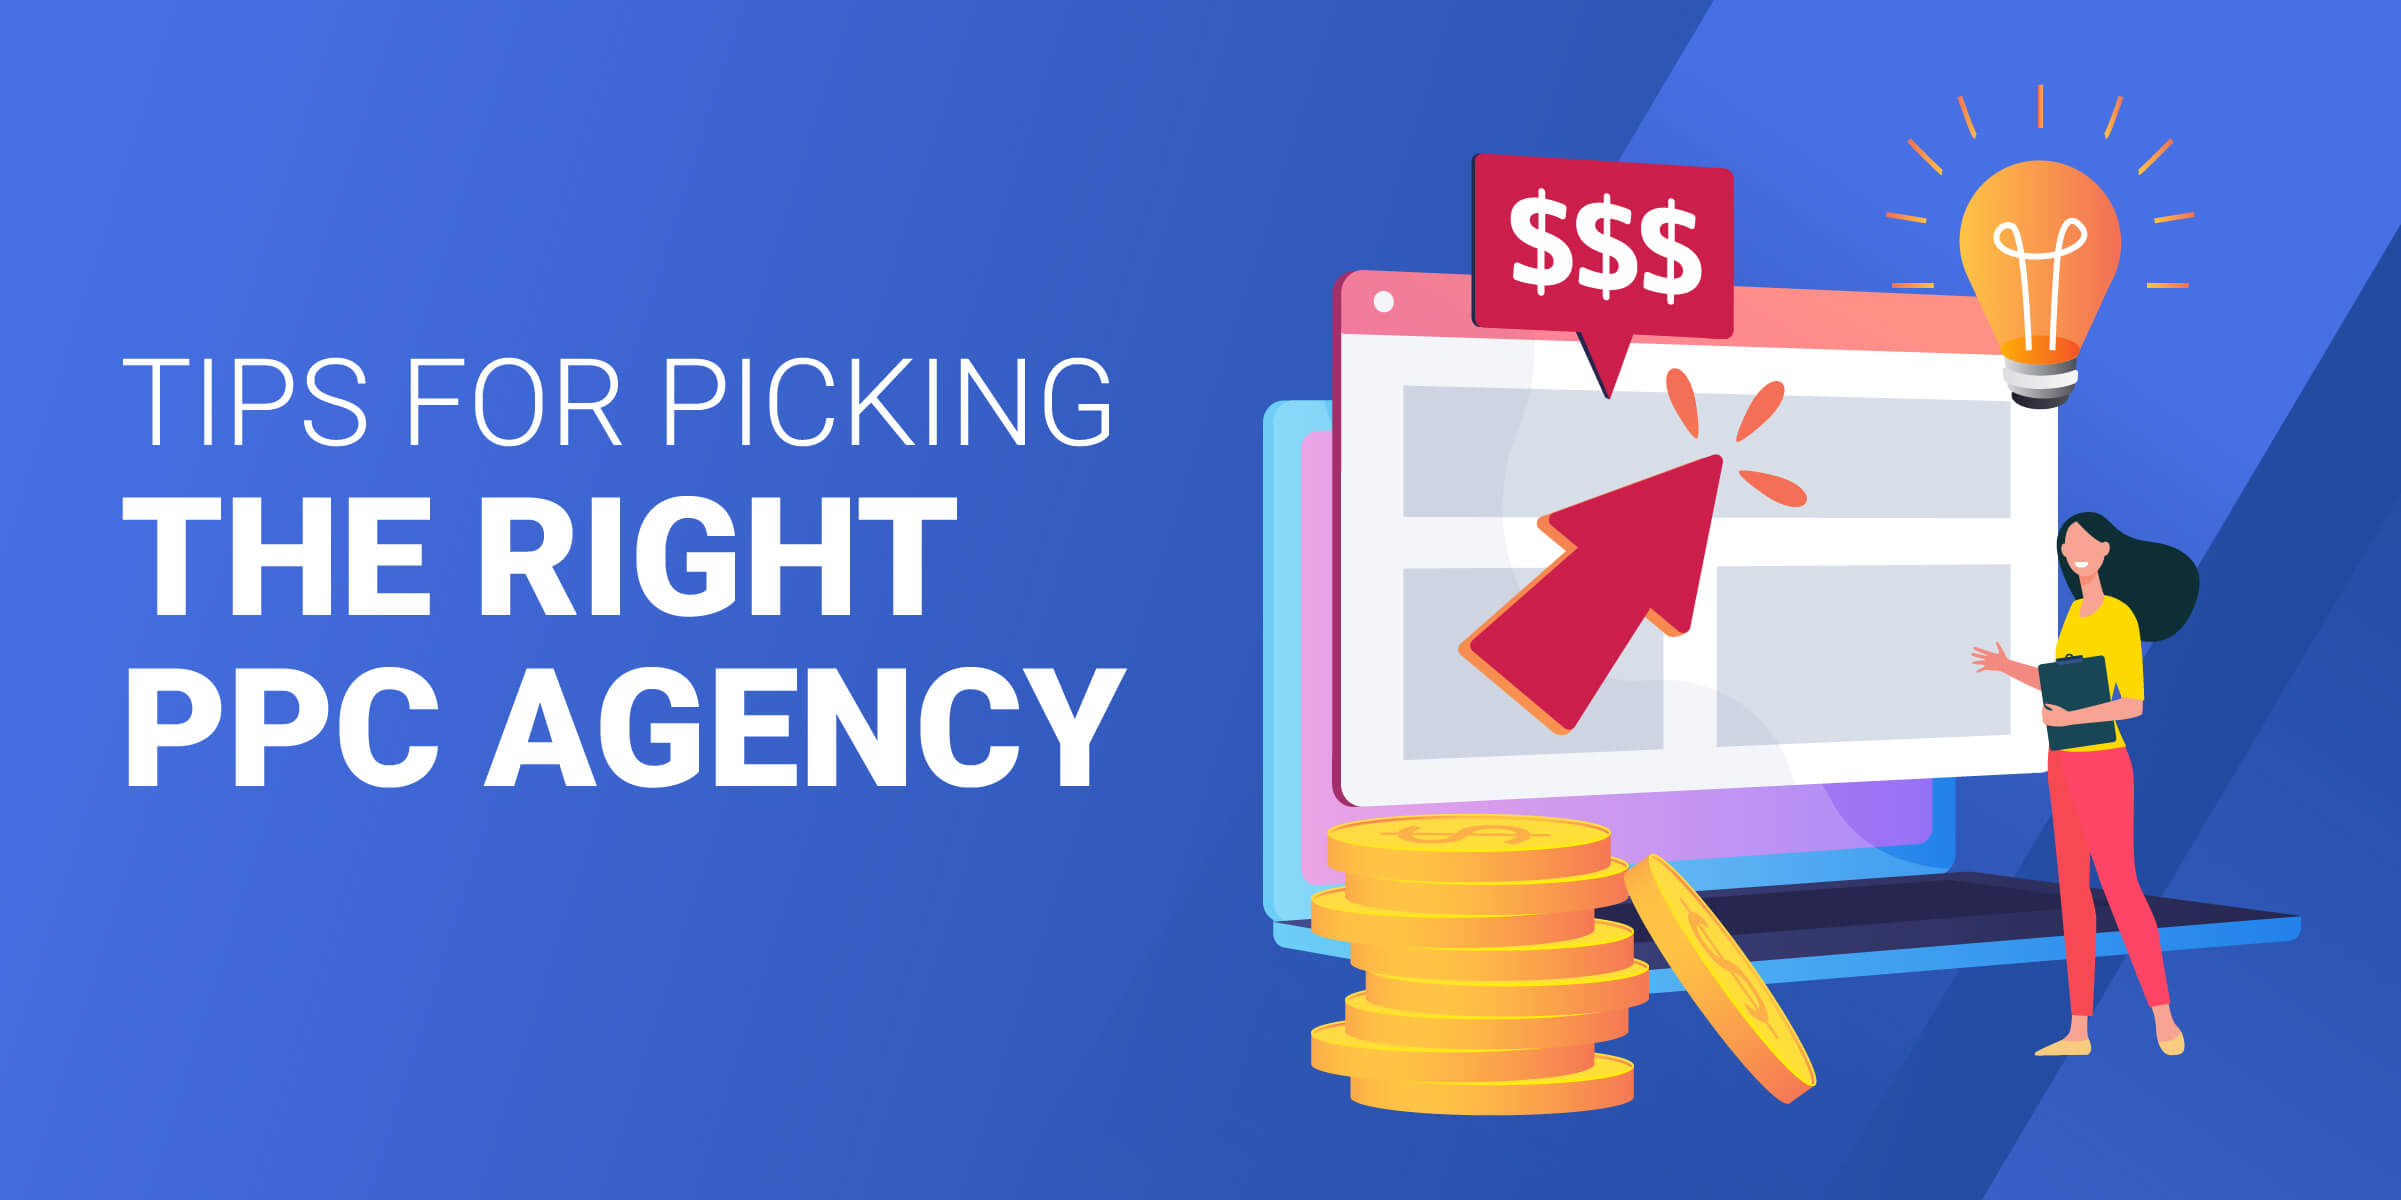 Tips for Picking the Right PPC Agency